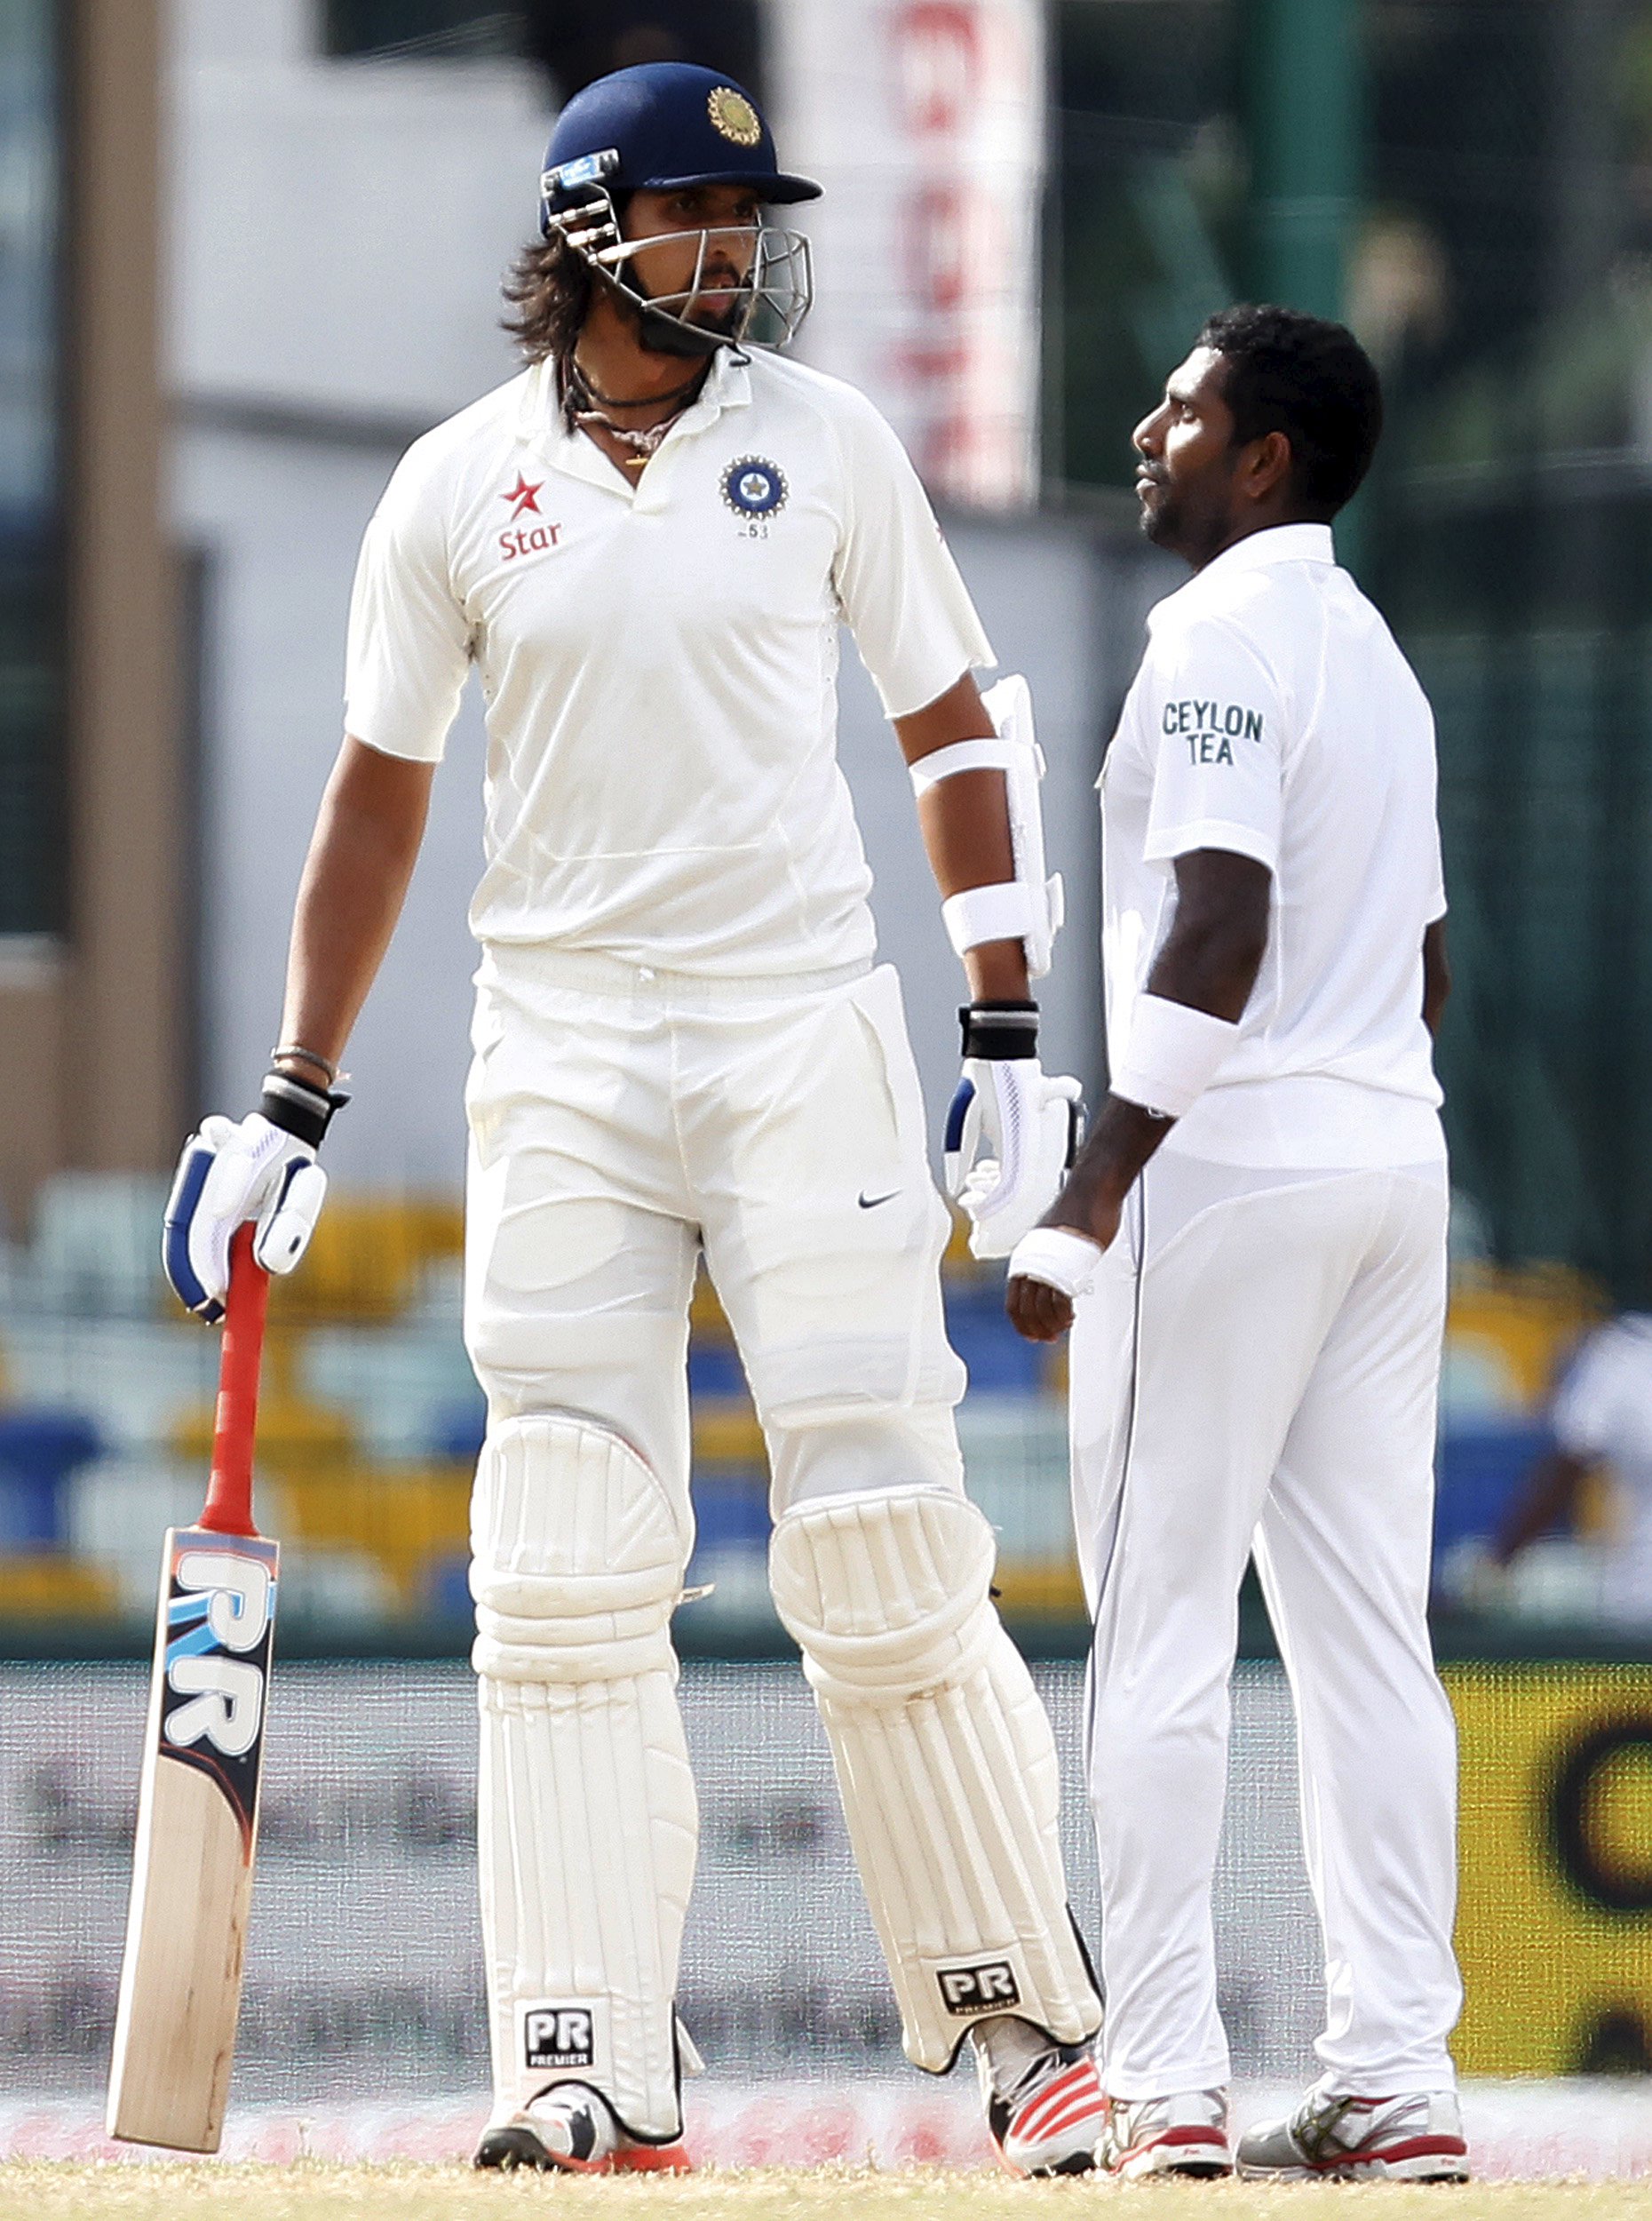 India's Ishant Sharma (left) argues with Sri Lanka's Dhammika Prasad (right) during the fourth day of their third and final test cricket match in Colombo August 31, 2015. Photo: REUTERS